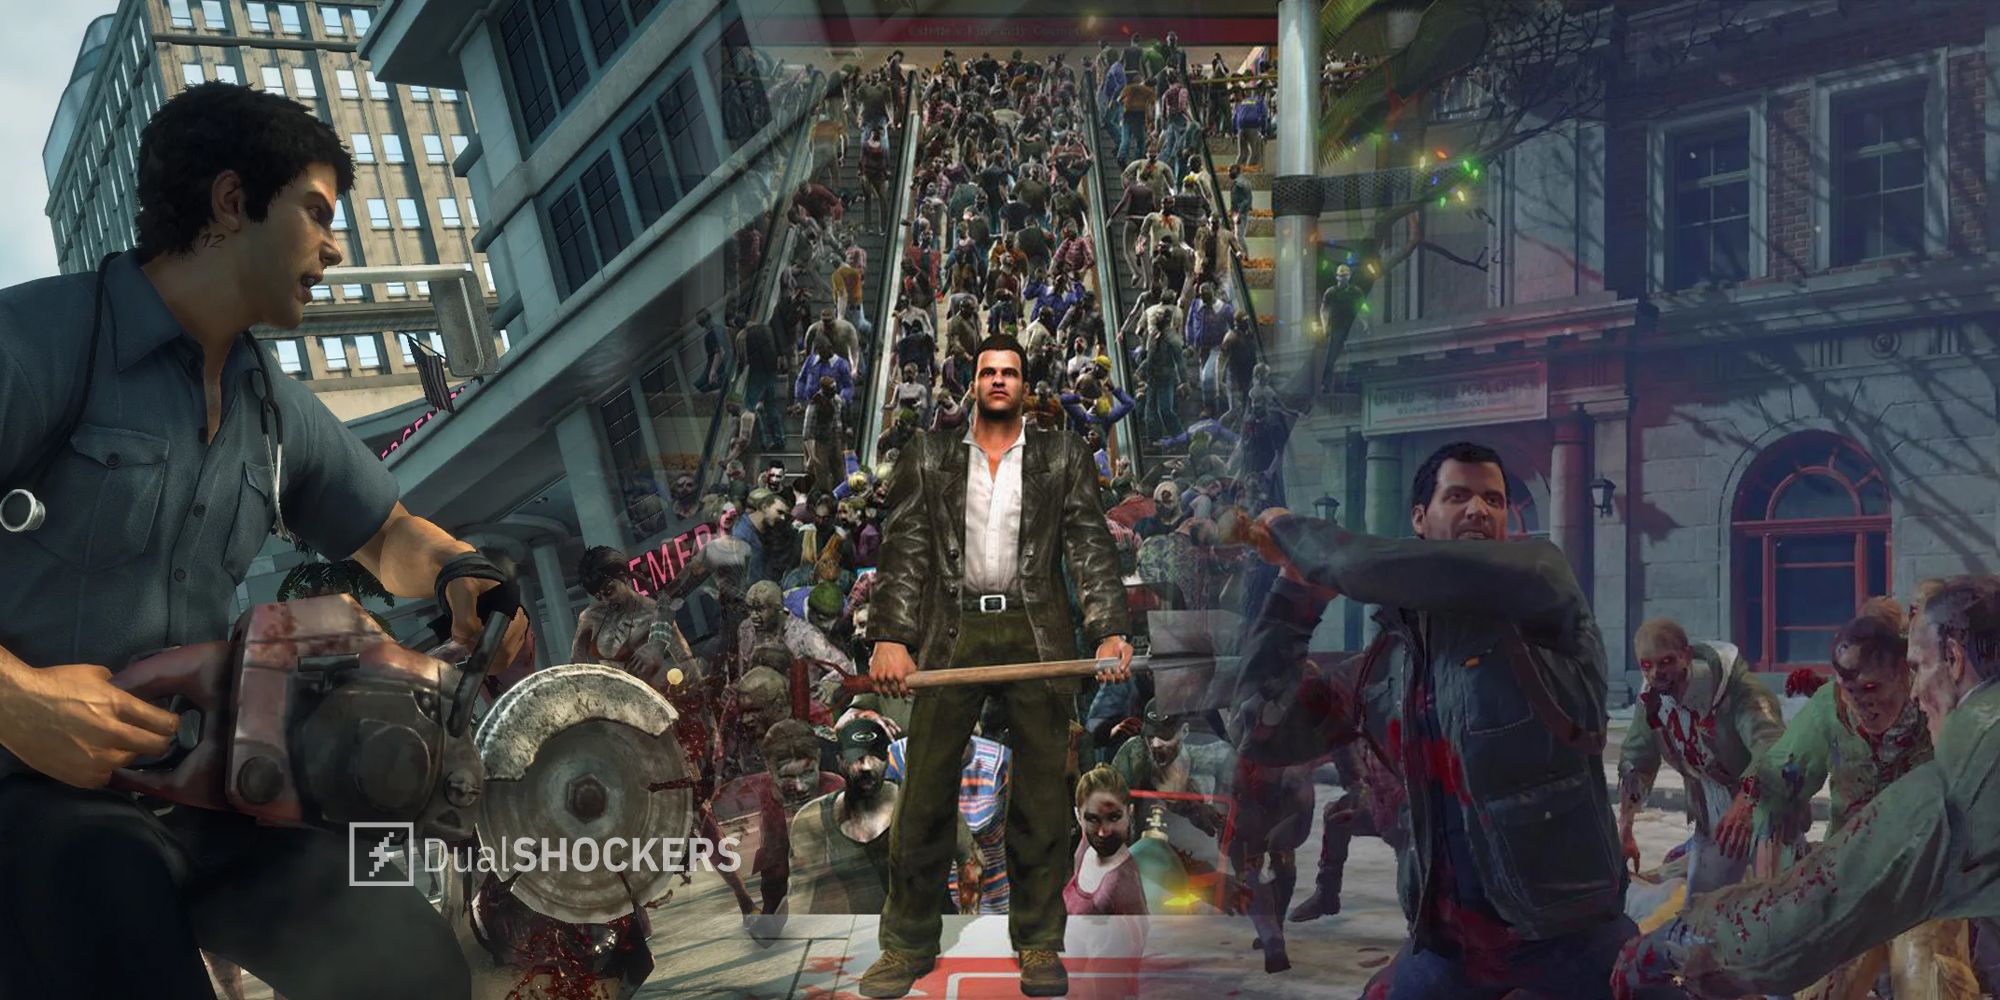 Why Did The Dead Rising Series Disappear?